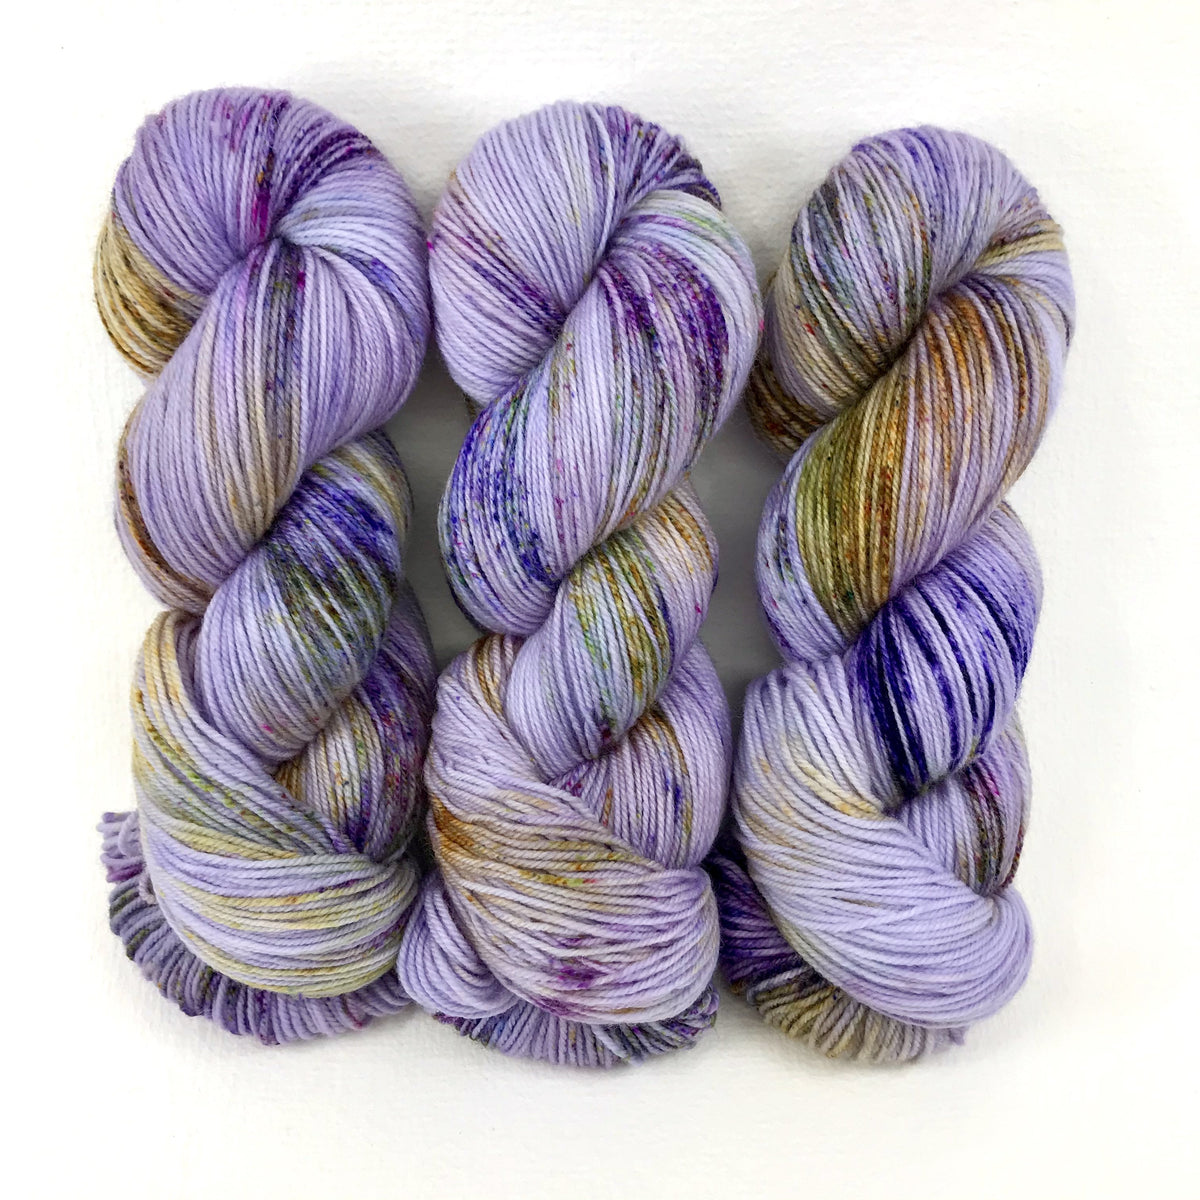 Lavender Fields Forever in Worsted Weight